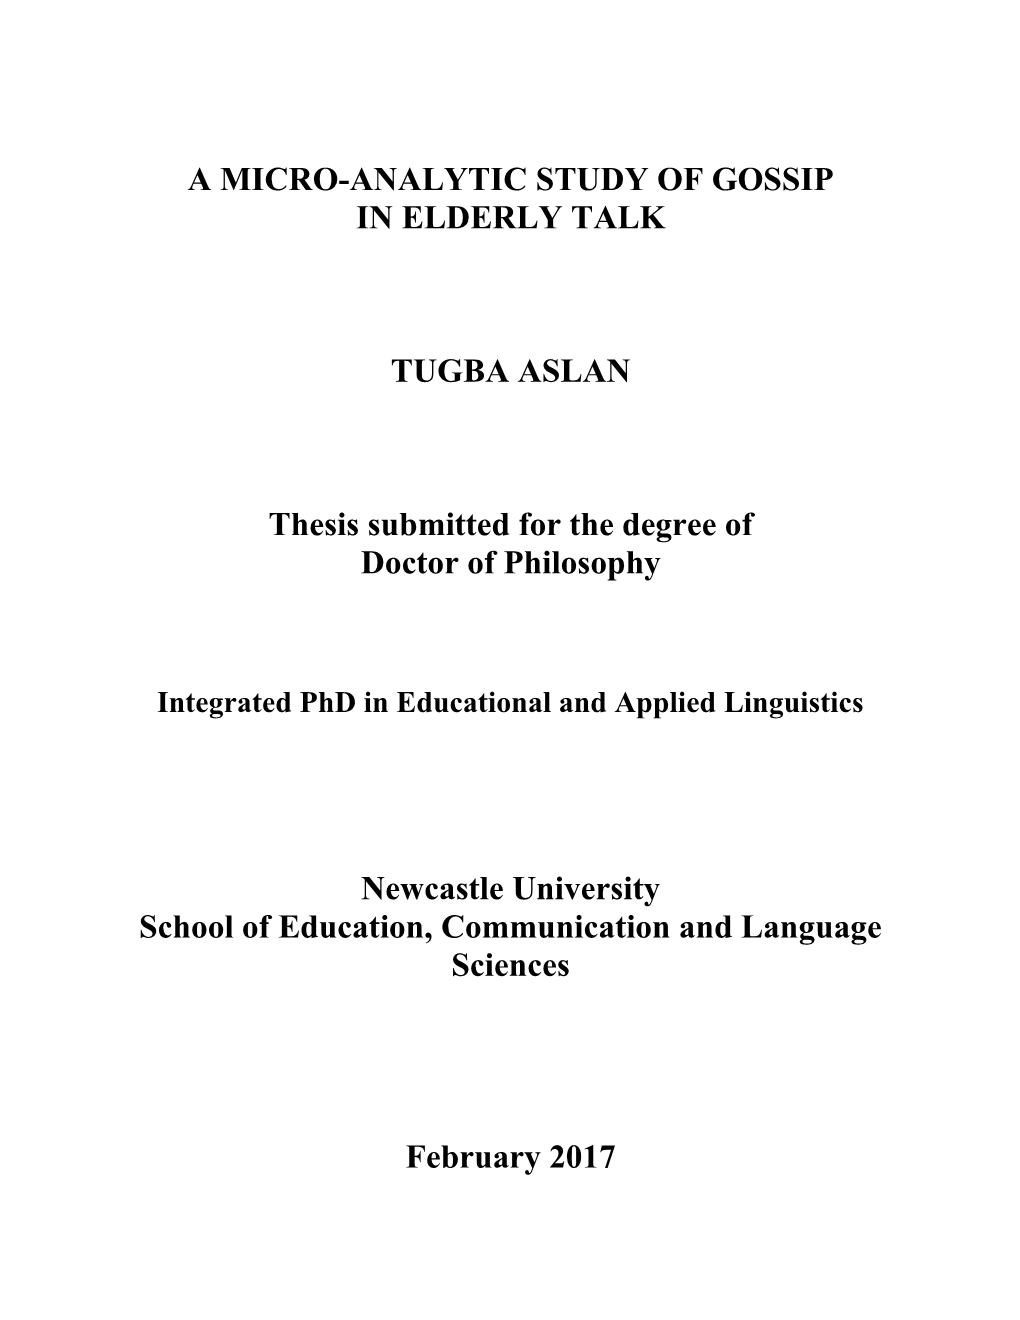 A MICRO-ANALYTIC STUDY of GOSSIP in ELDERLY TALK TUGBA ASLAN Thesis Submitted for the Degree of Doctor of Philosophy Newcastle